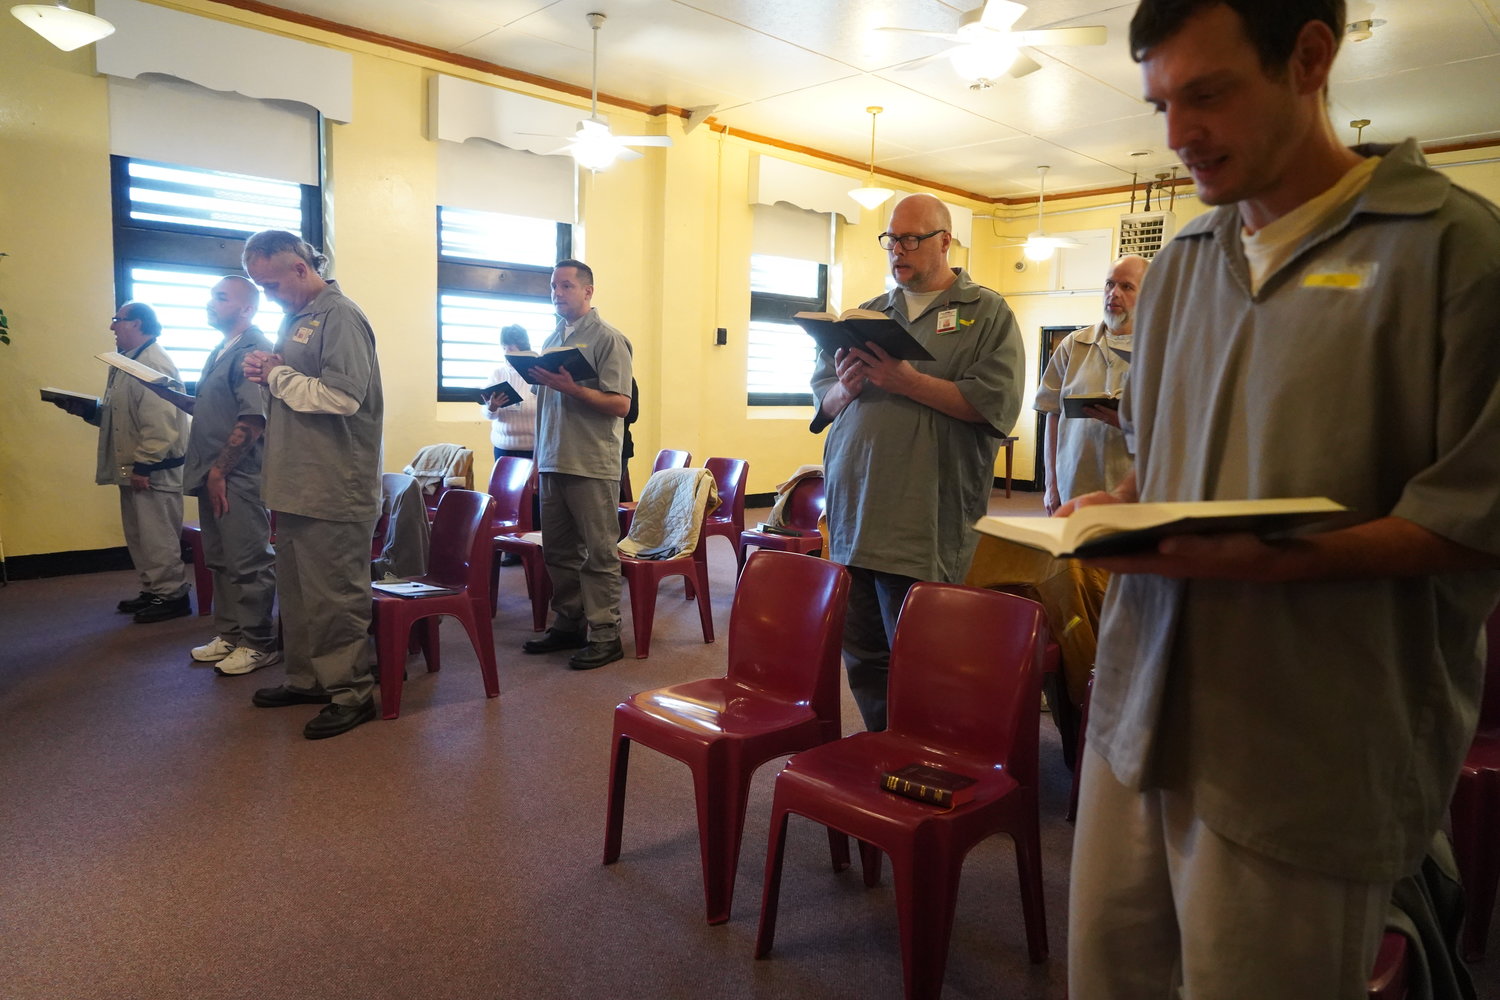 Residents of the Algoa Correctional Center in Jefferson City and volunteers sing a hymn during Mass offered by Bishop W. Shawn McKnight and Father Michael Penn on Nov. 6.